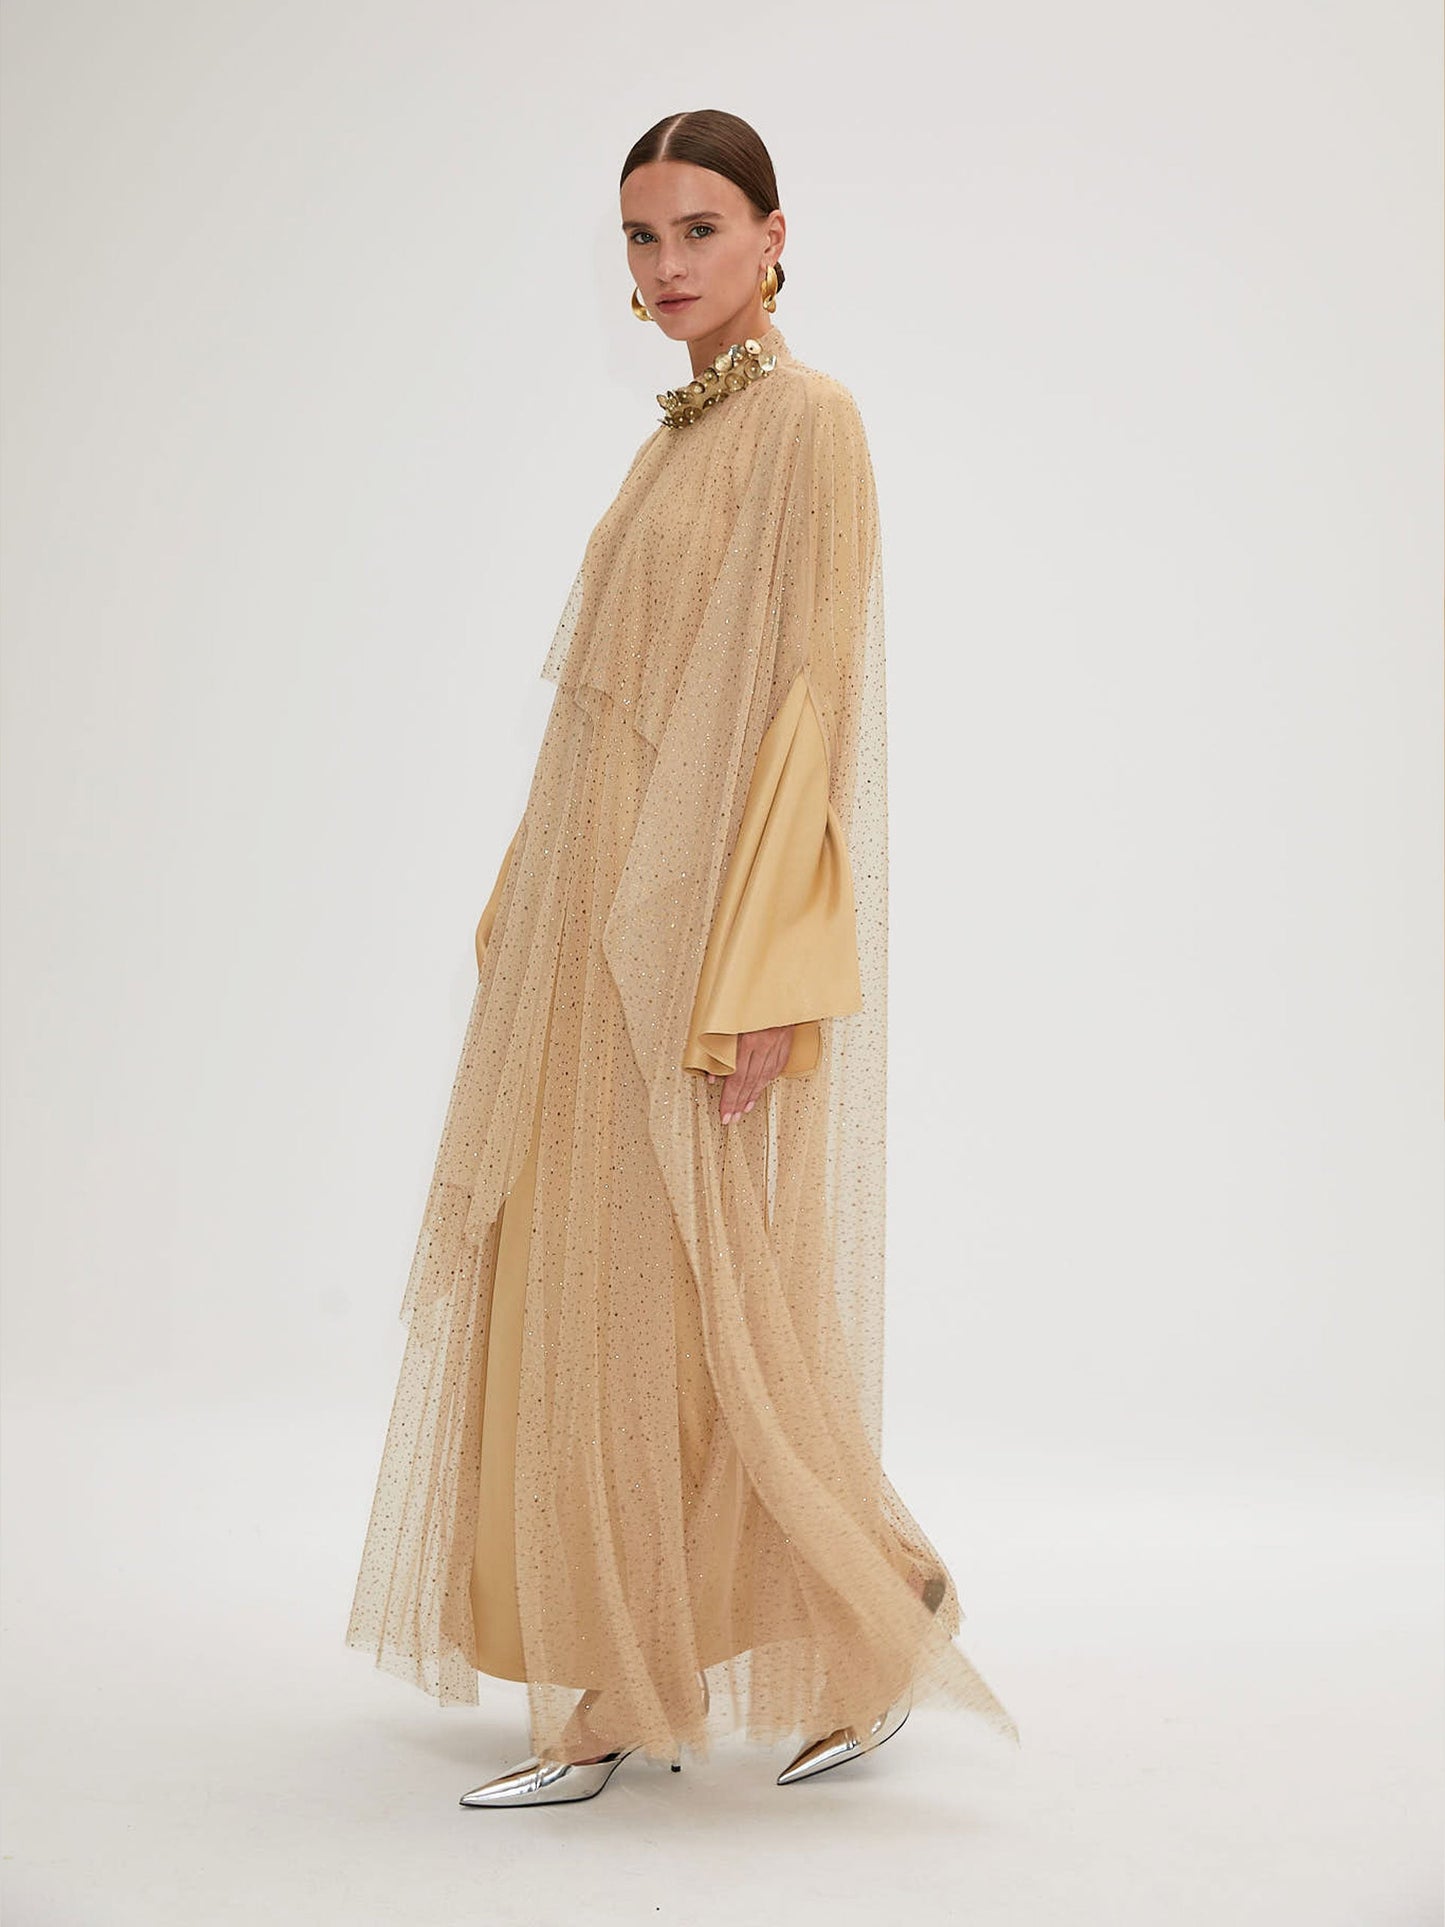 Shiny Stone Embroidered Gold Color Cloak